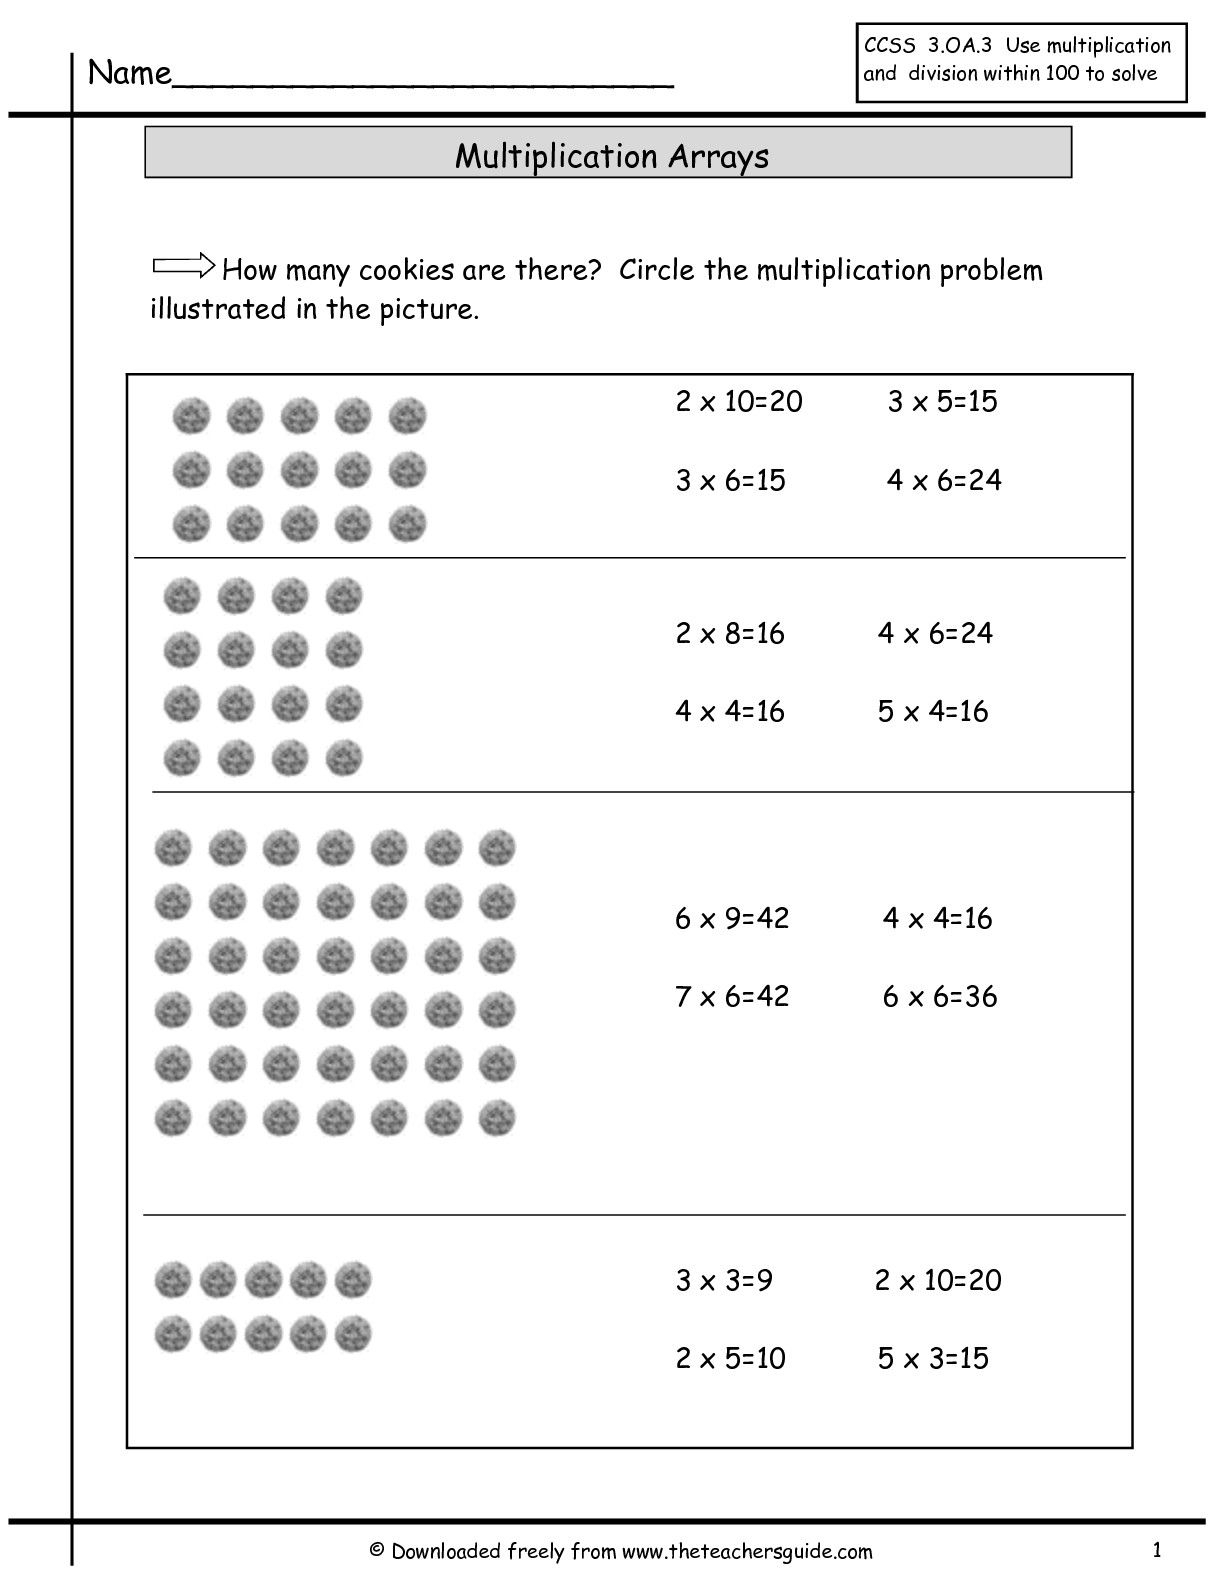 Multiplication Array Worksheets From The Teacher&amp;#039;s Guide